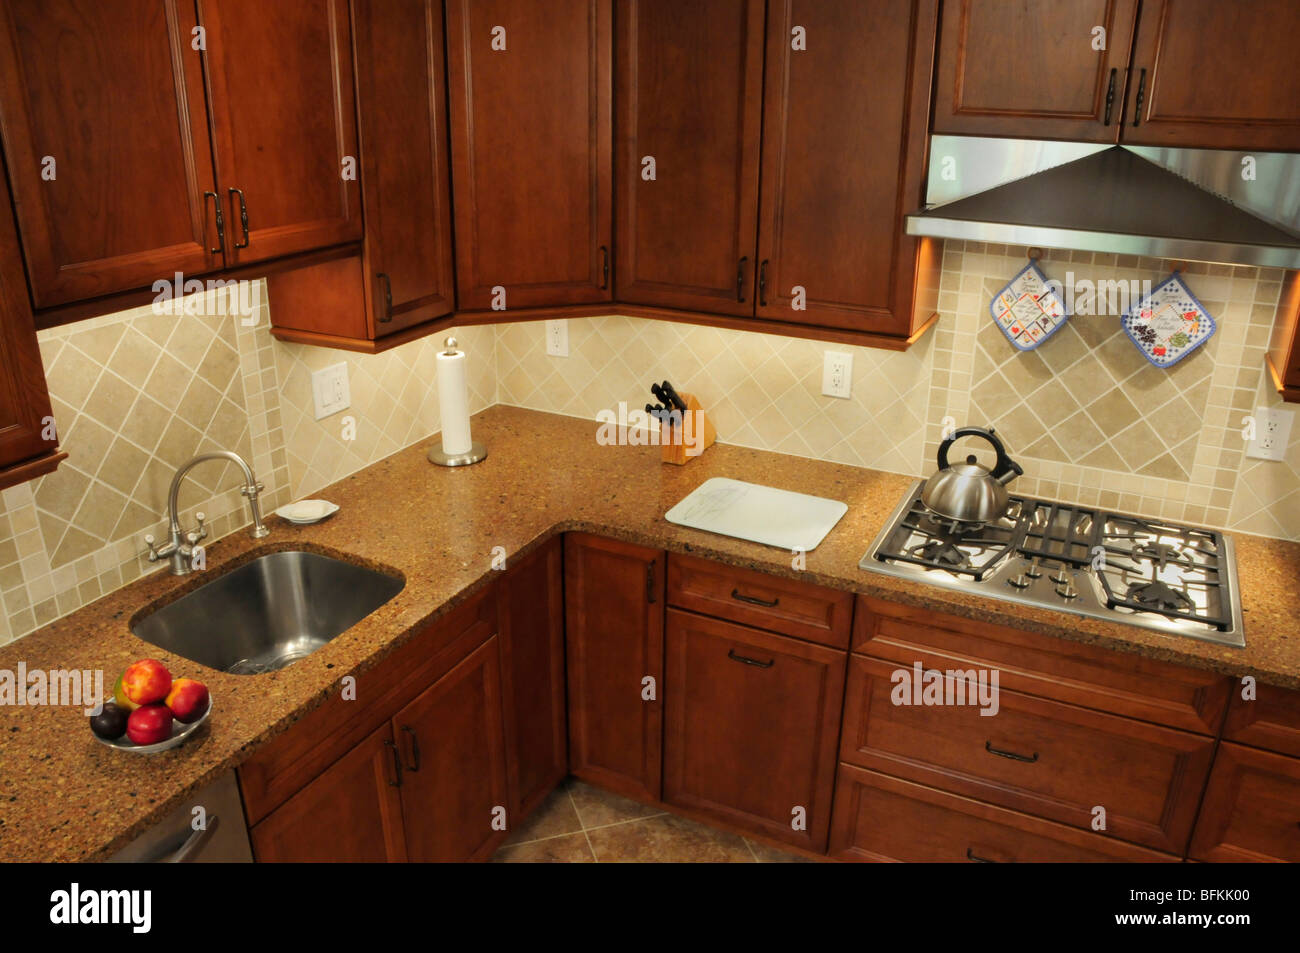 Work area in a remodeled kitchen from a high angle Stock Photo